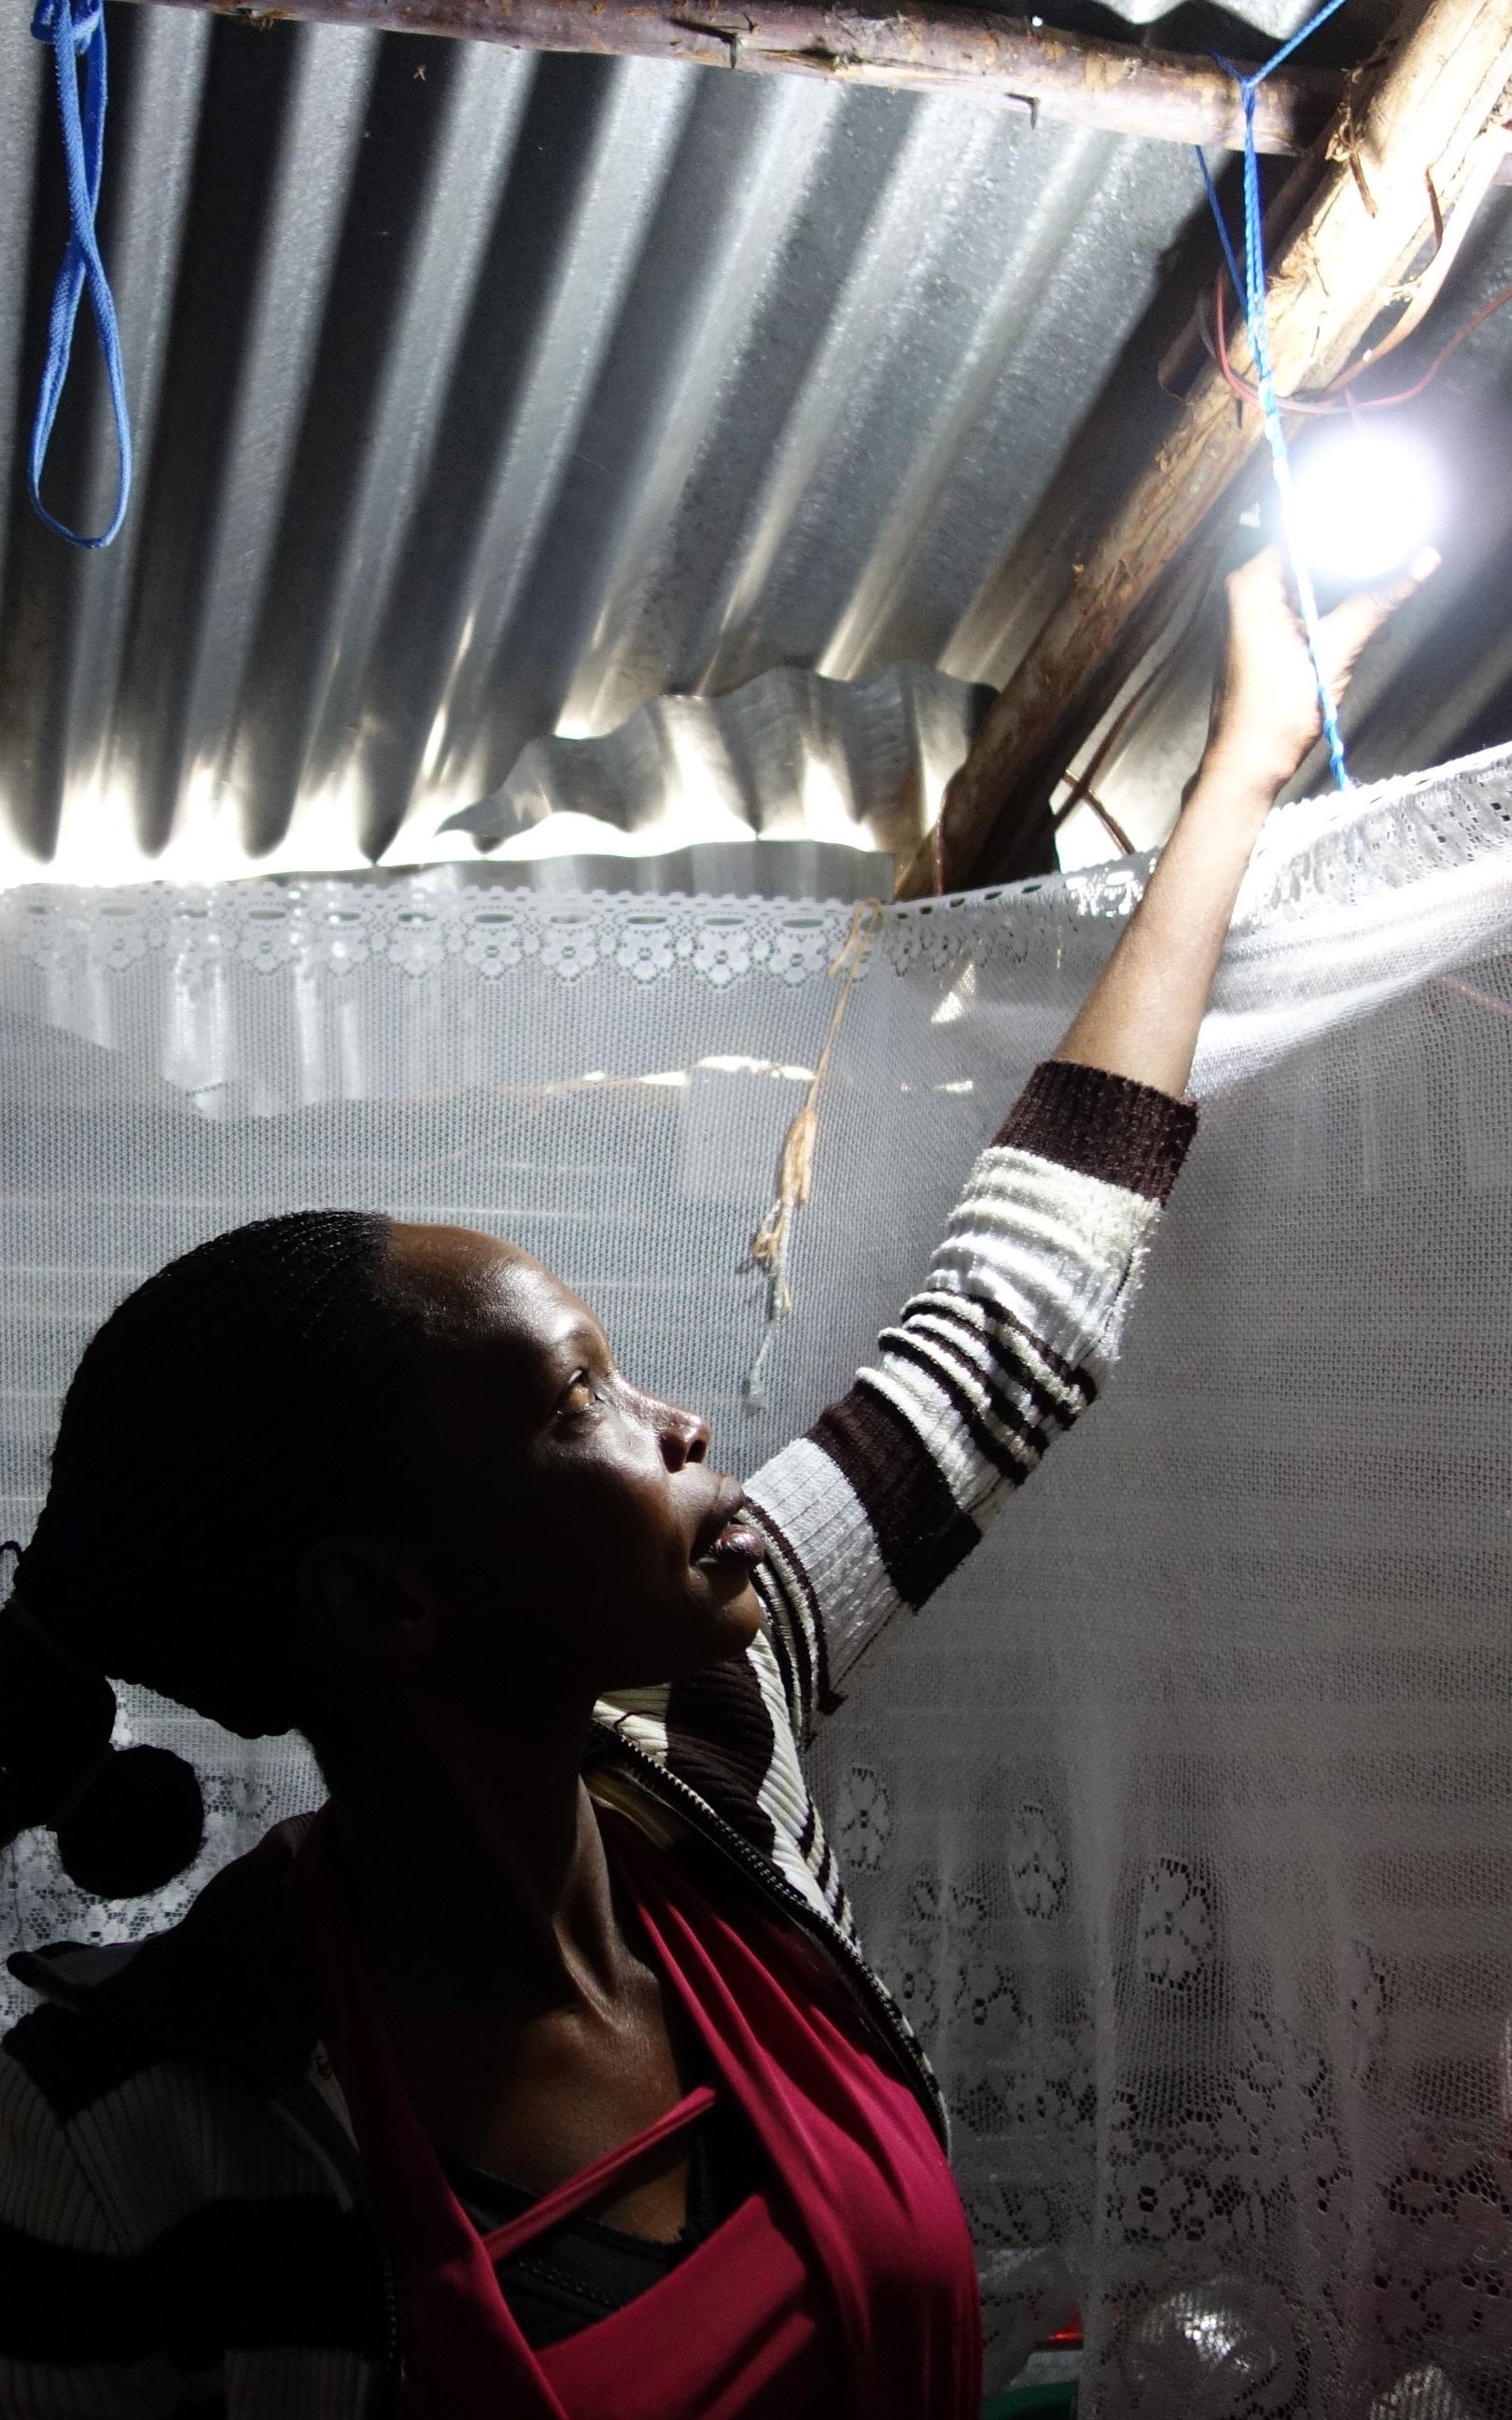 Empowering villages without electricity